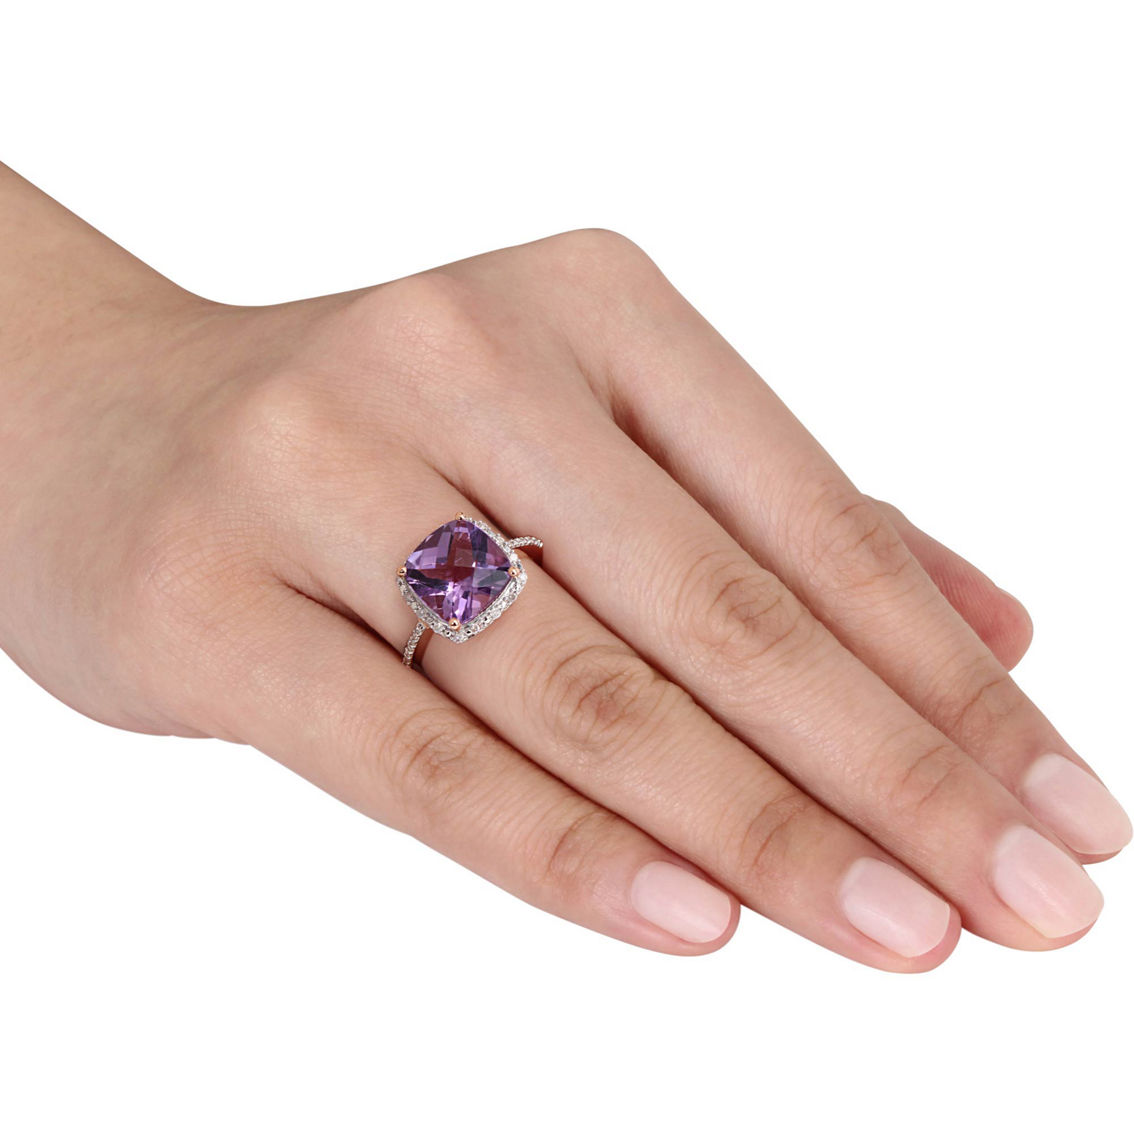 Sofia B. 10K Rose Gold 3 1/2 CTW Amethyst and 1/10 CTW Diamond Accent Halo Ring - Image 3 of 3